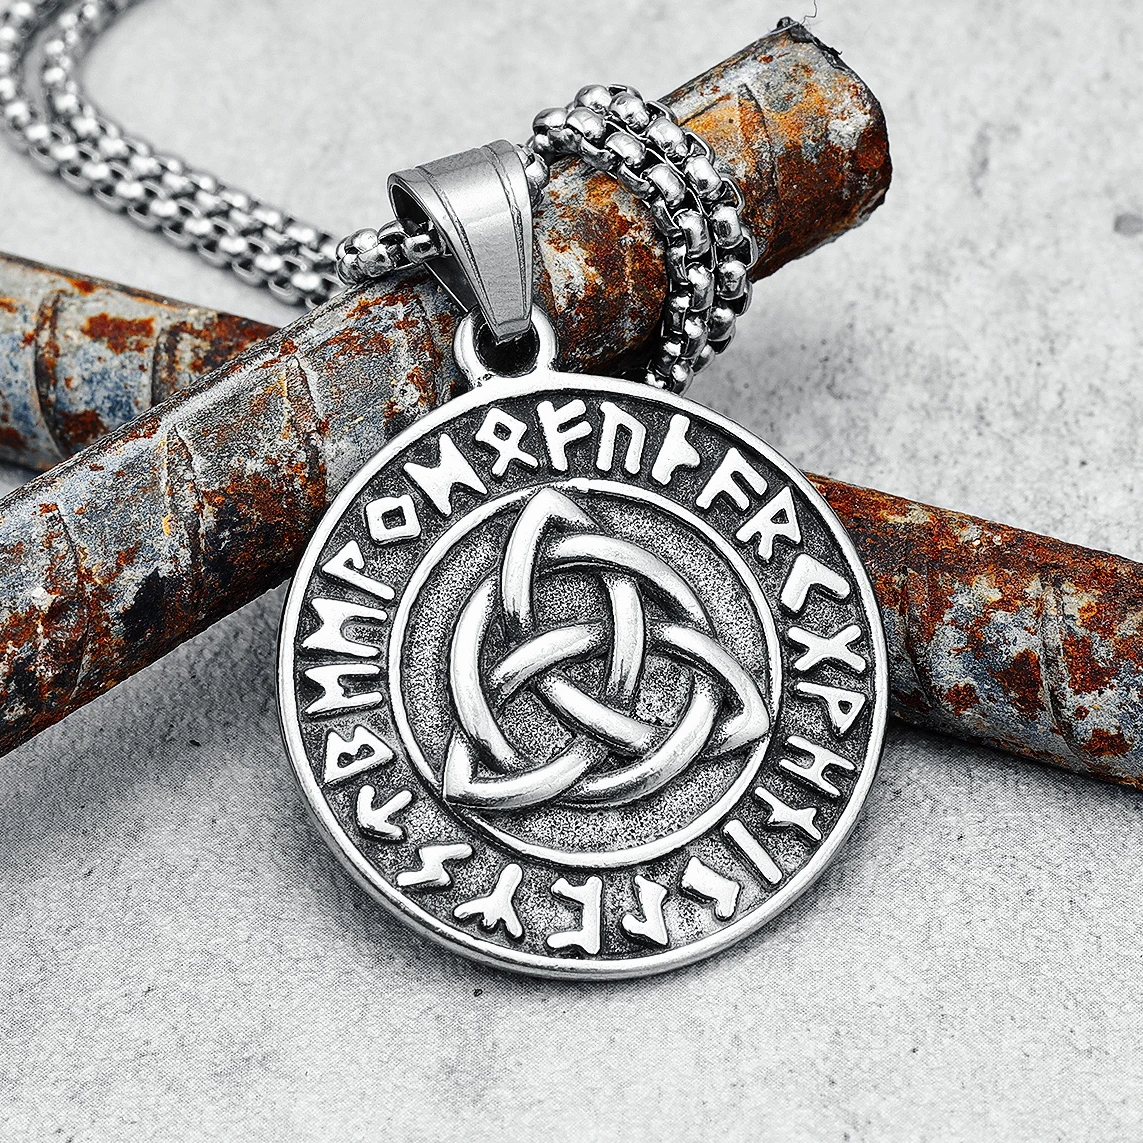 Viking Knot Runes Men Necklaces 316L Stainless Steel Nordic Mythology Retro Pendant Chain Punk Rock for Friend Male Jewelry Gift